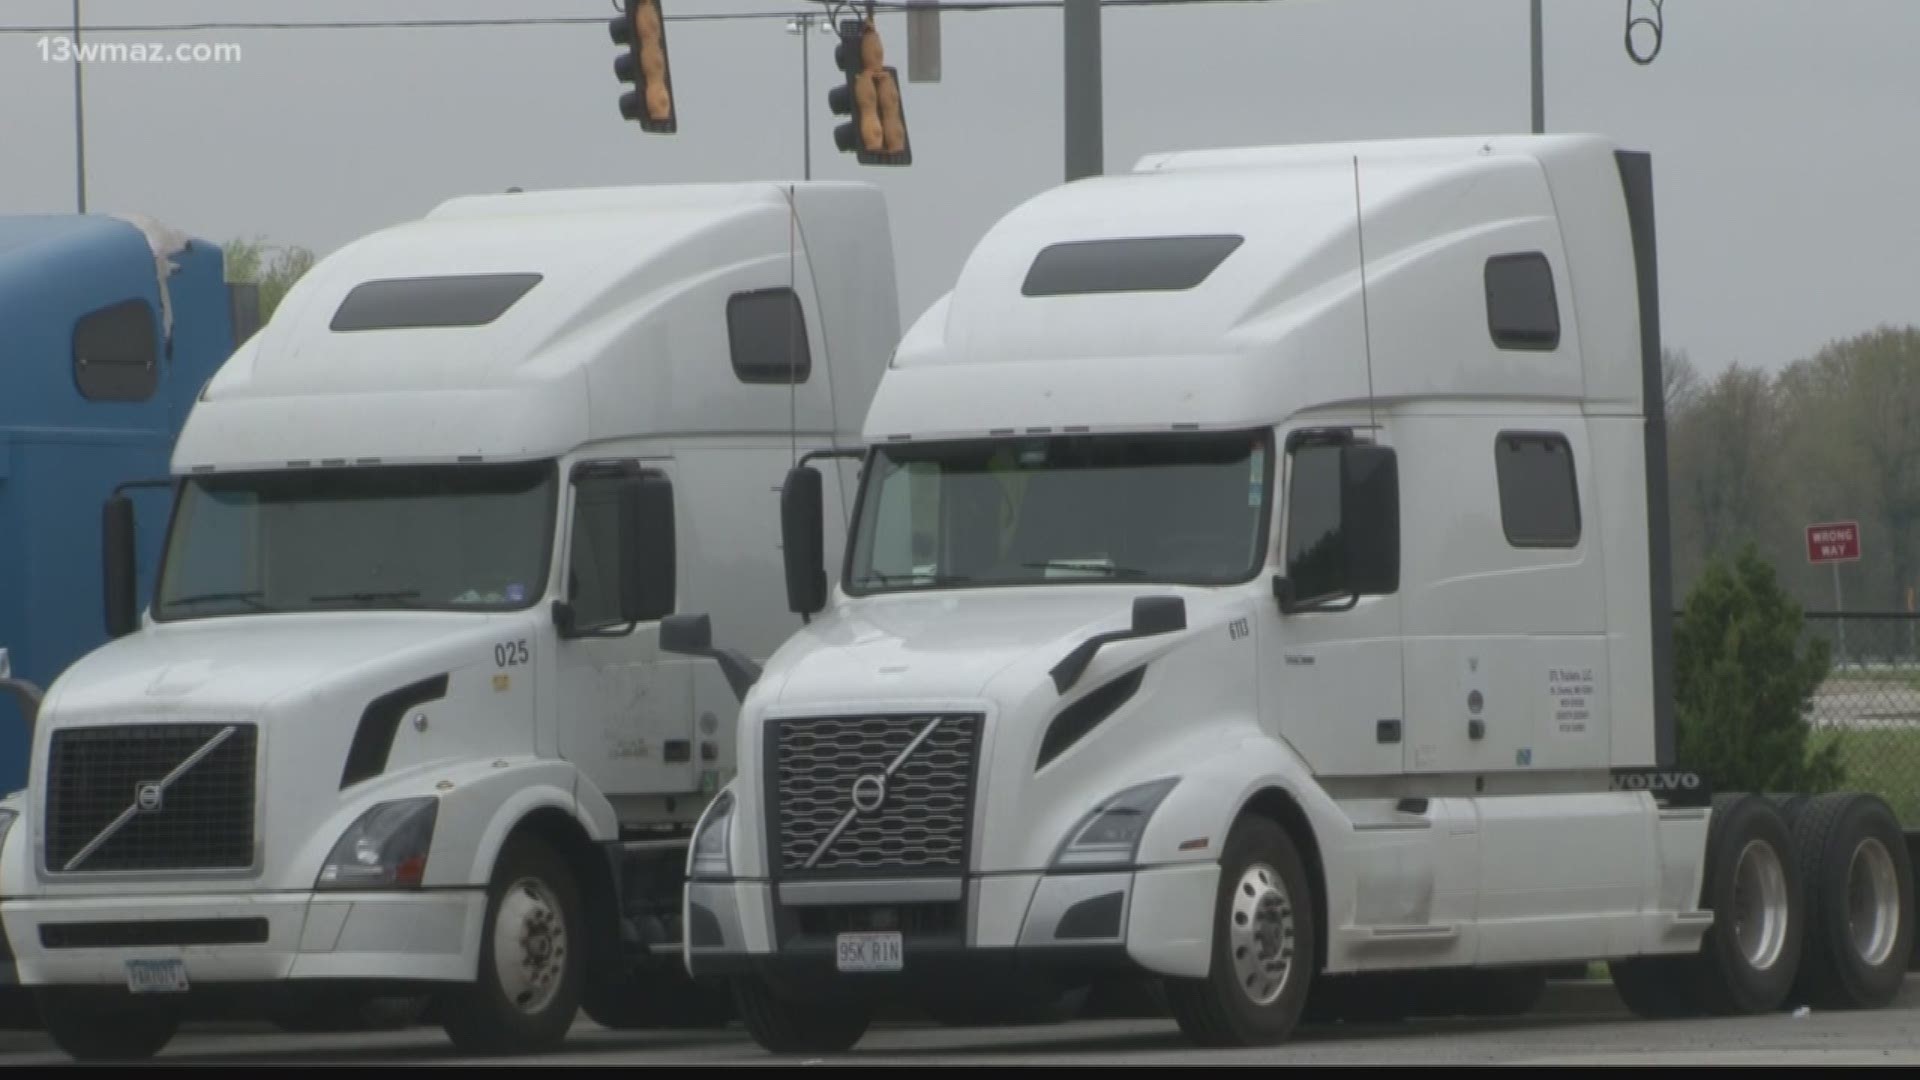 Federal rules and regulations that would limit the number of hours a truck driver can work were suspended across the country.